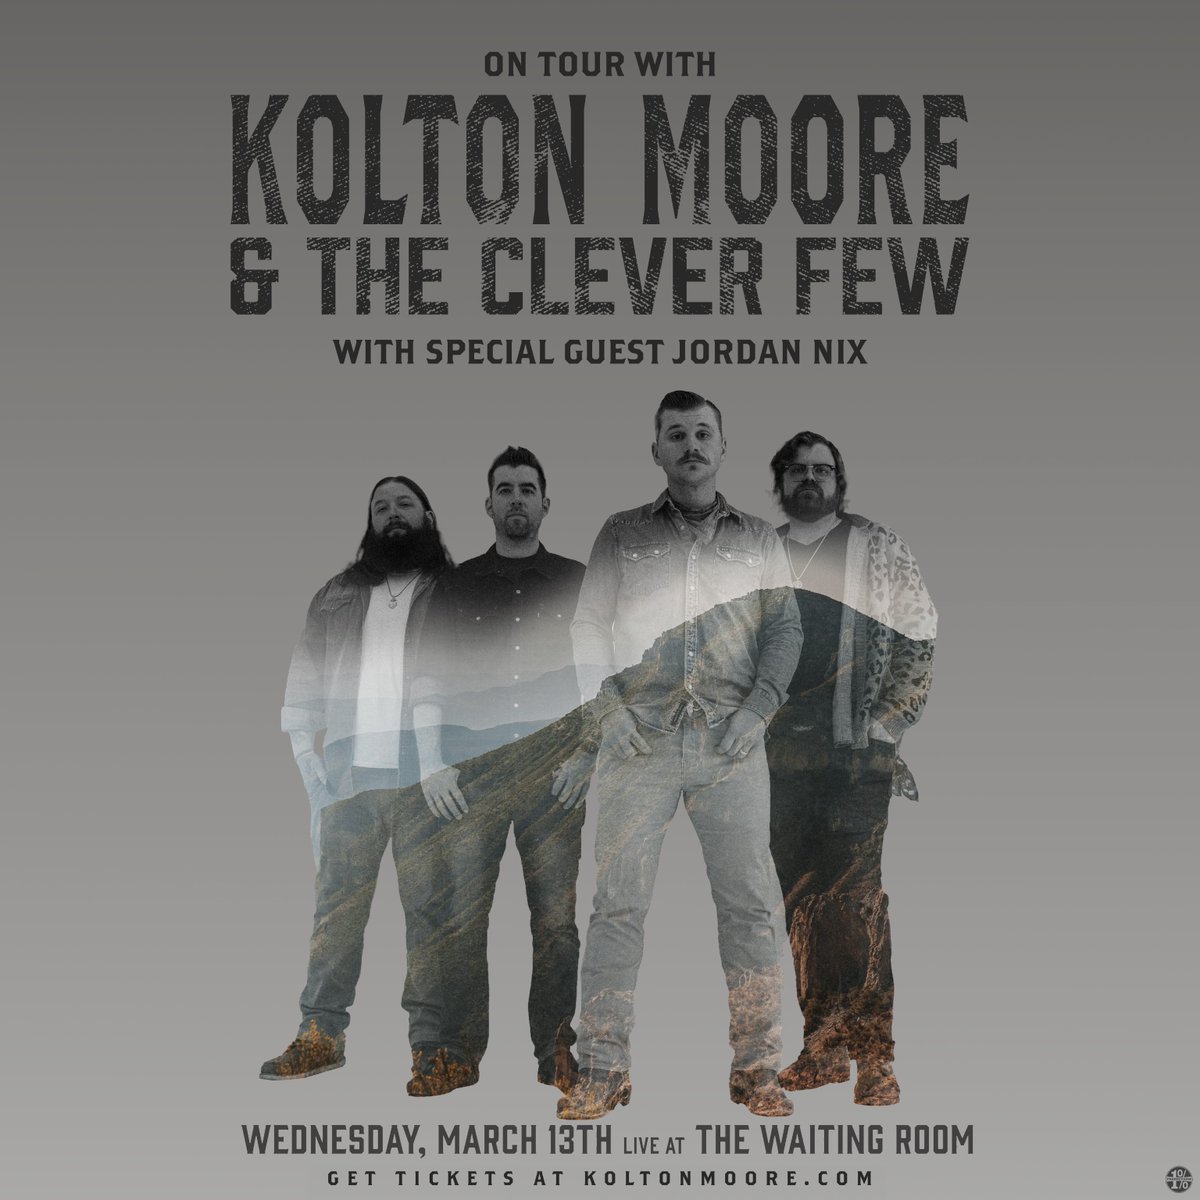 TONIGHT! Kolton Moore & The Clever Few live The Waiting Room. Grab tix while you can! 🎫 etix.com/ticket/p/74129…